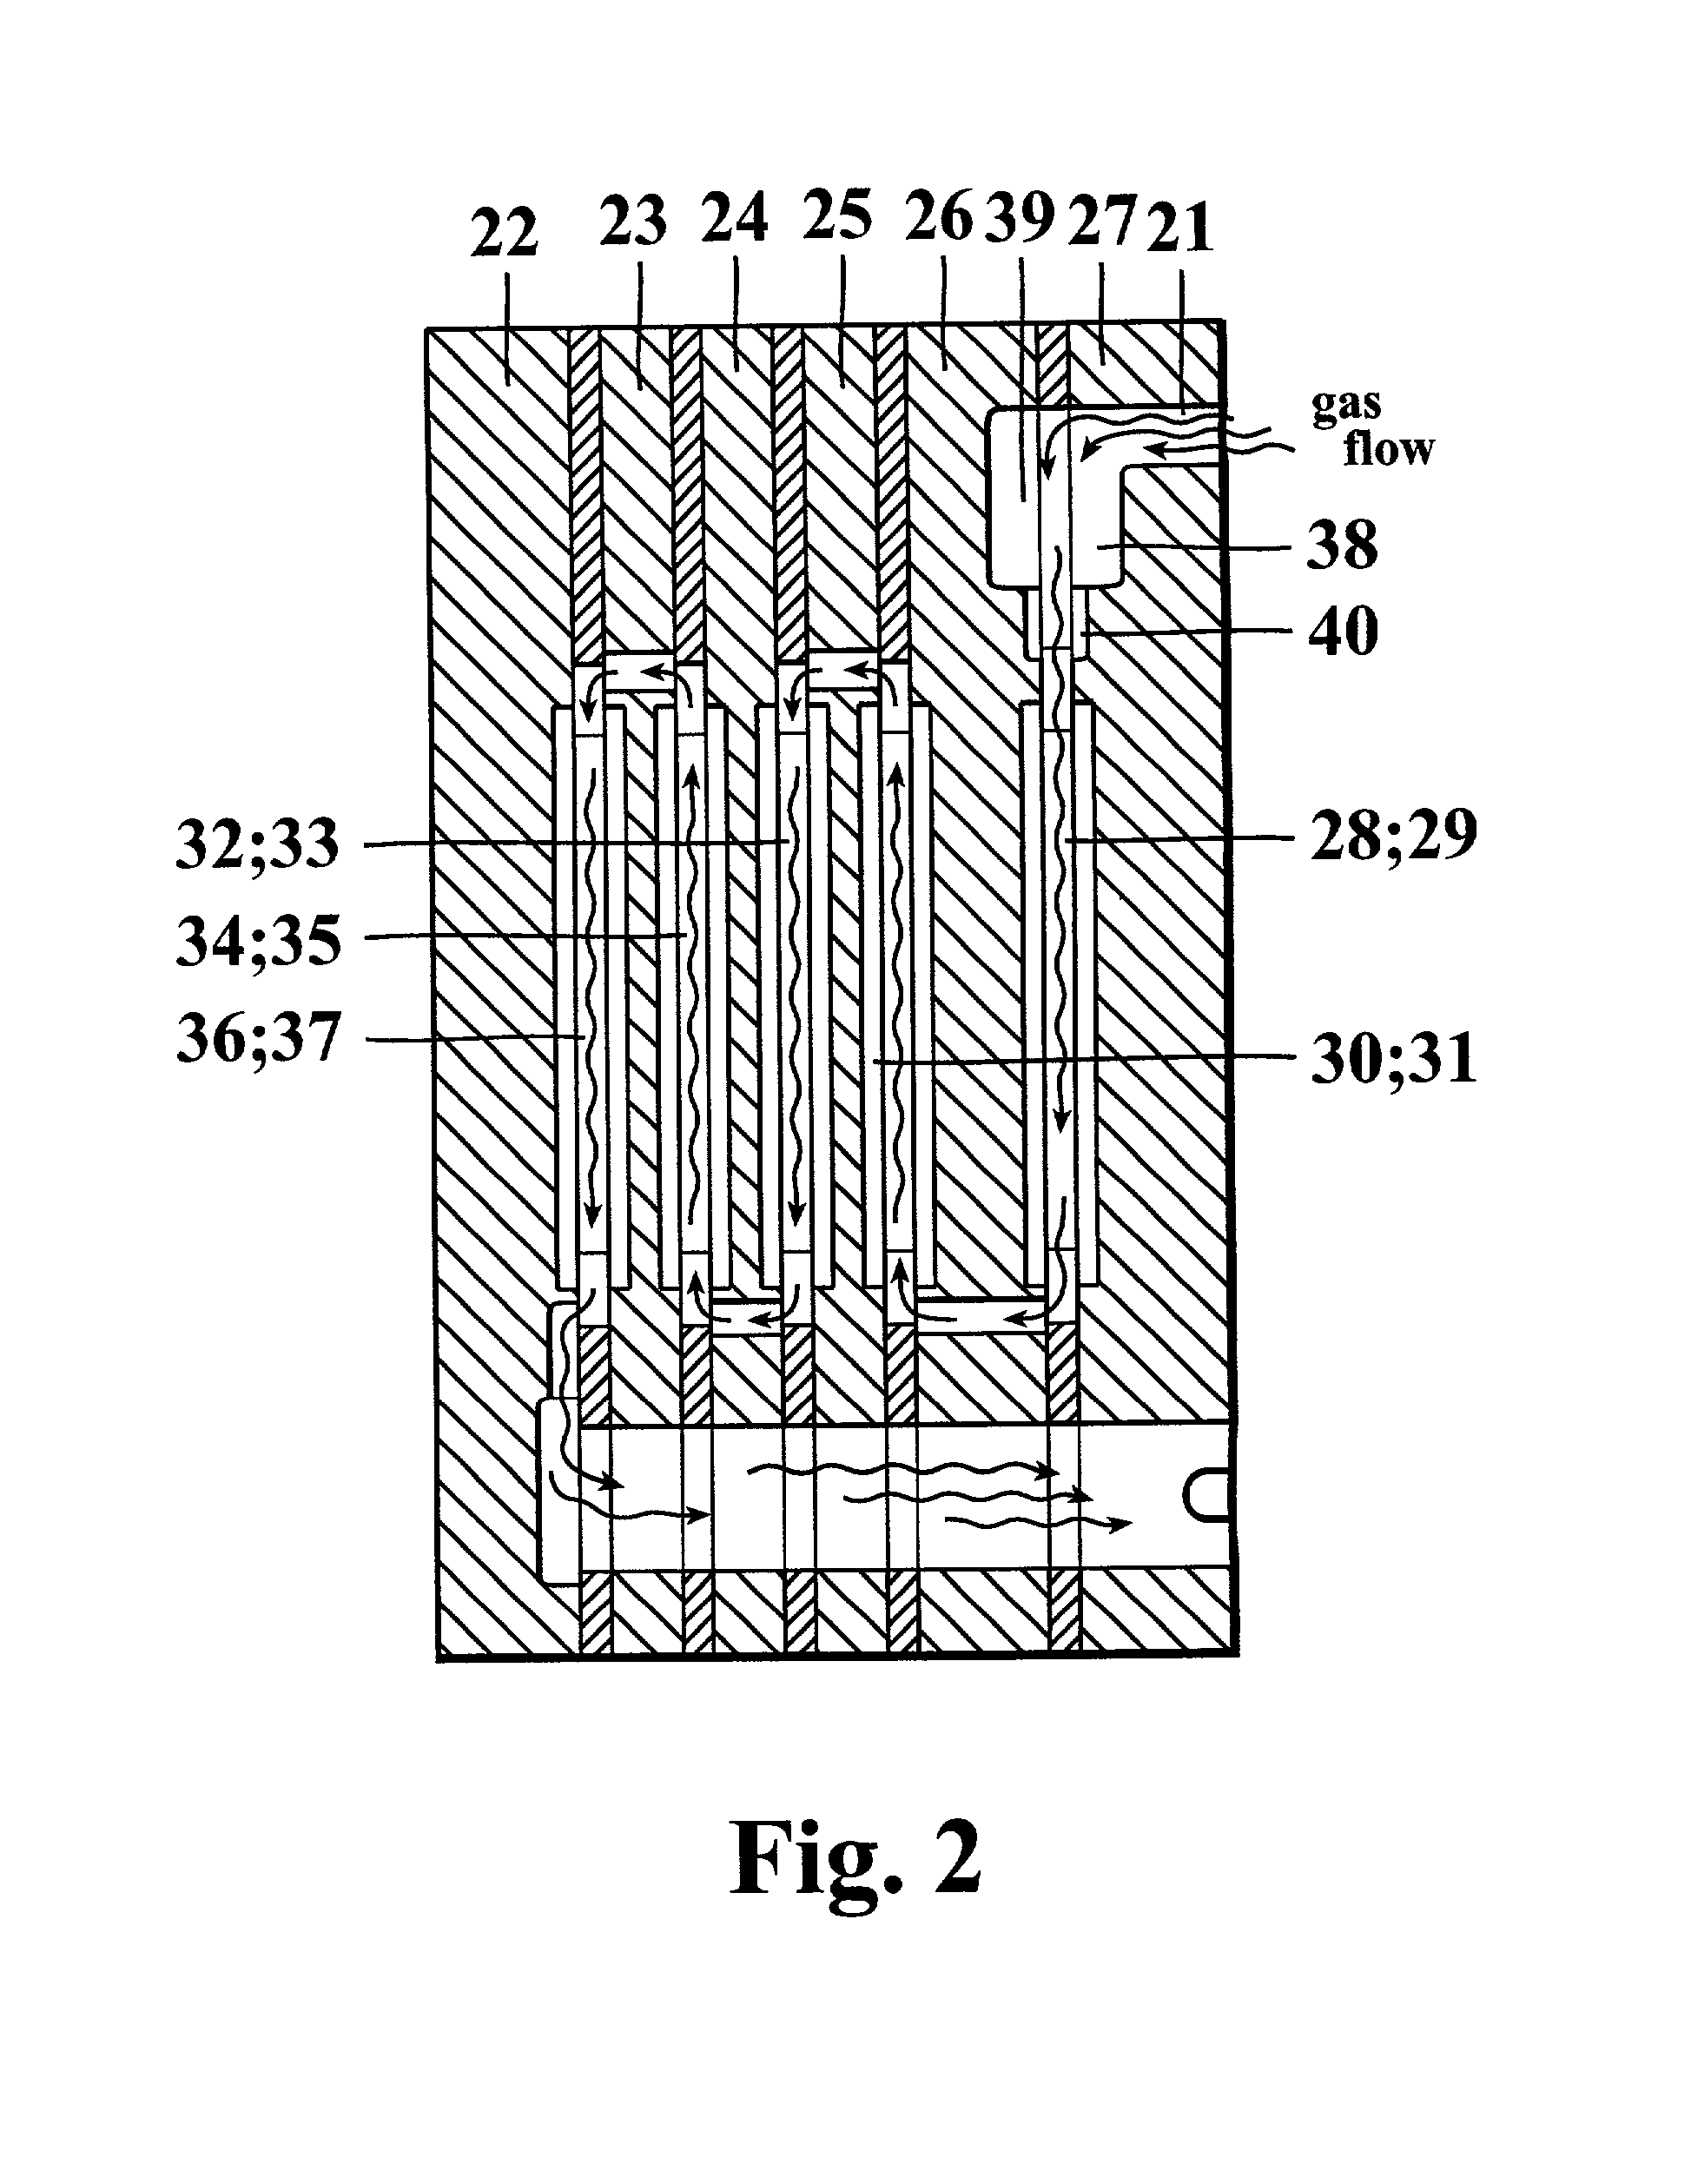 Method and apparatus of growing a thin film onto a substrate